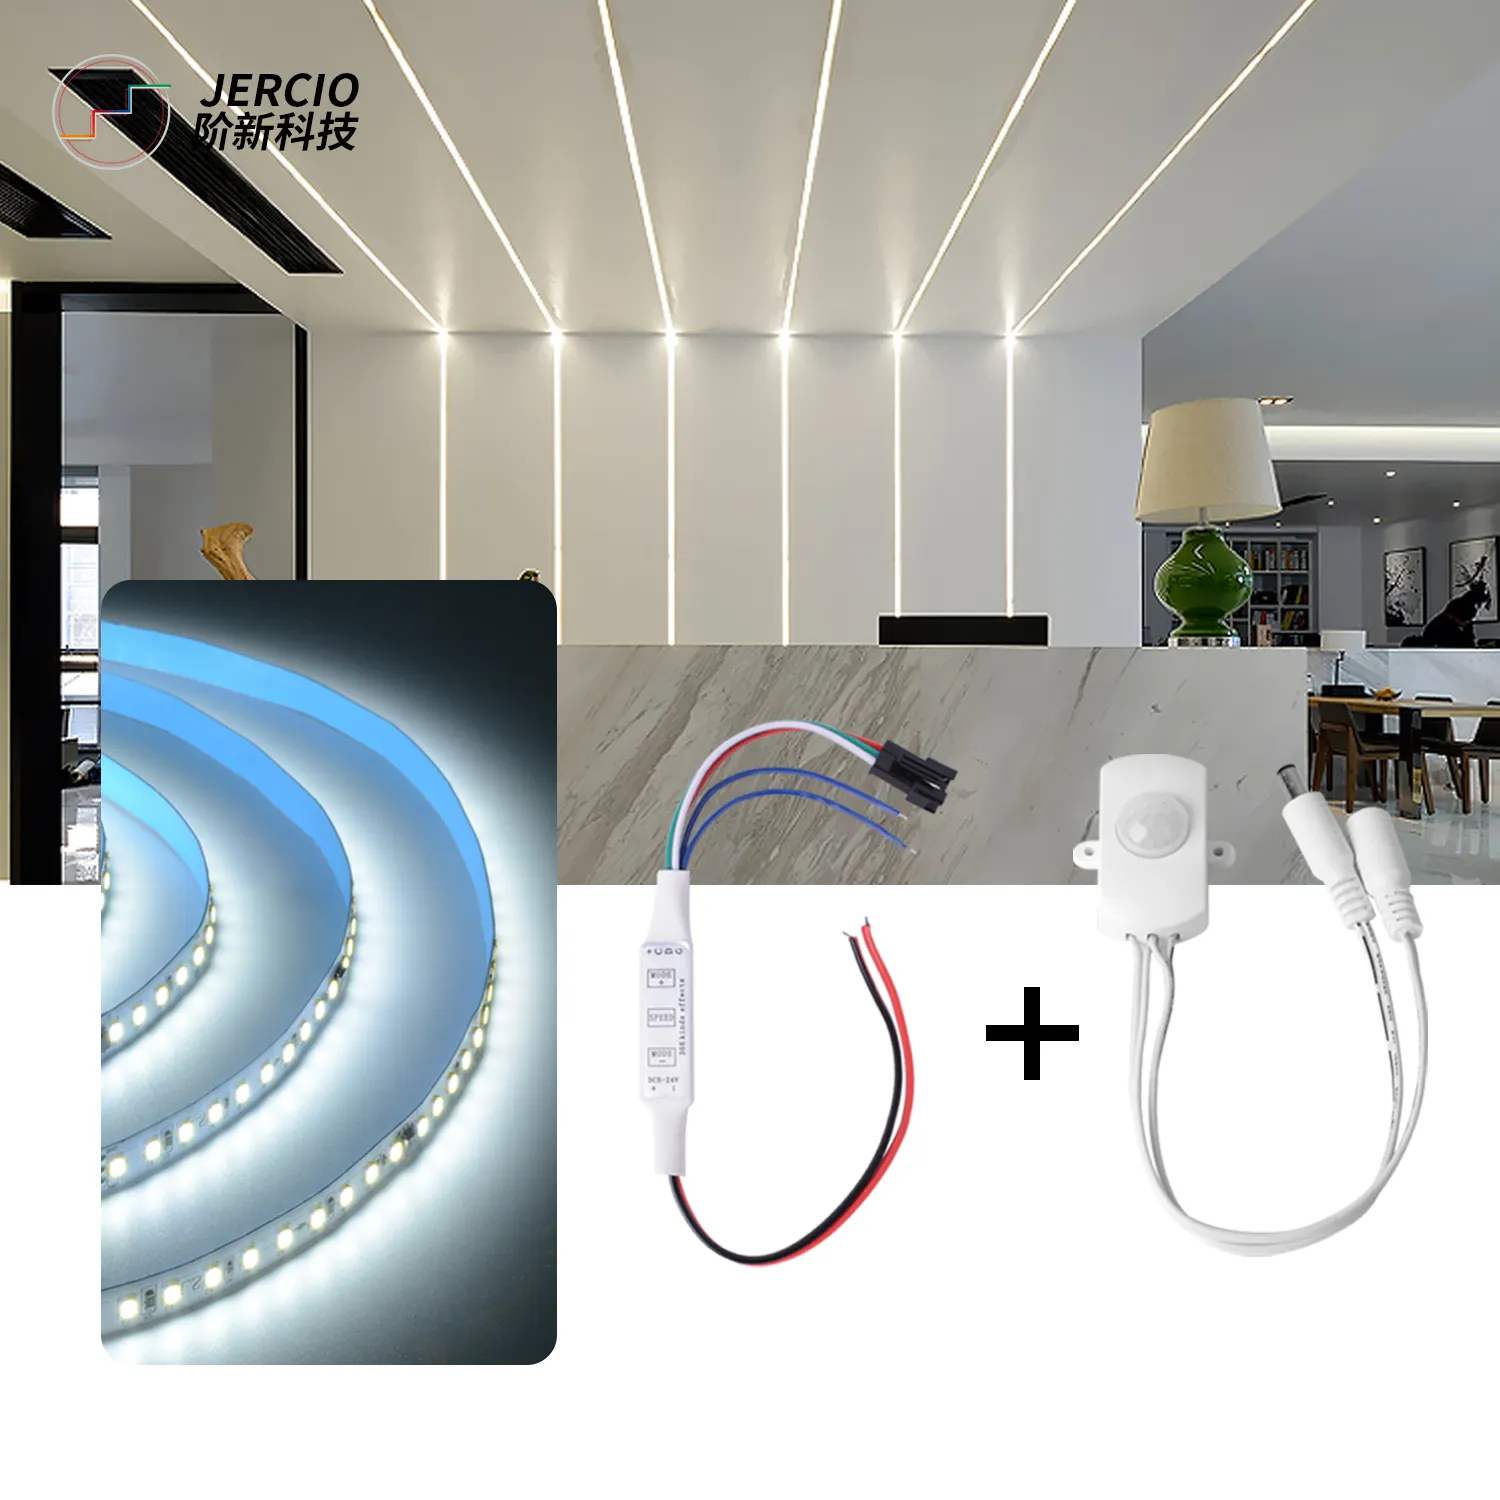 WS2811 Horse running water long bright light with monochrome 24V patch LED 2835 soft light strip staircase light